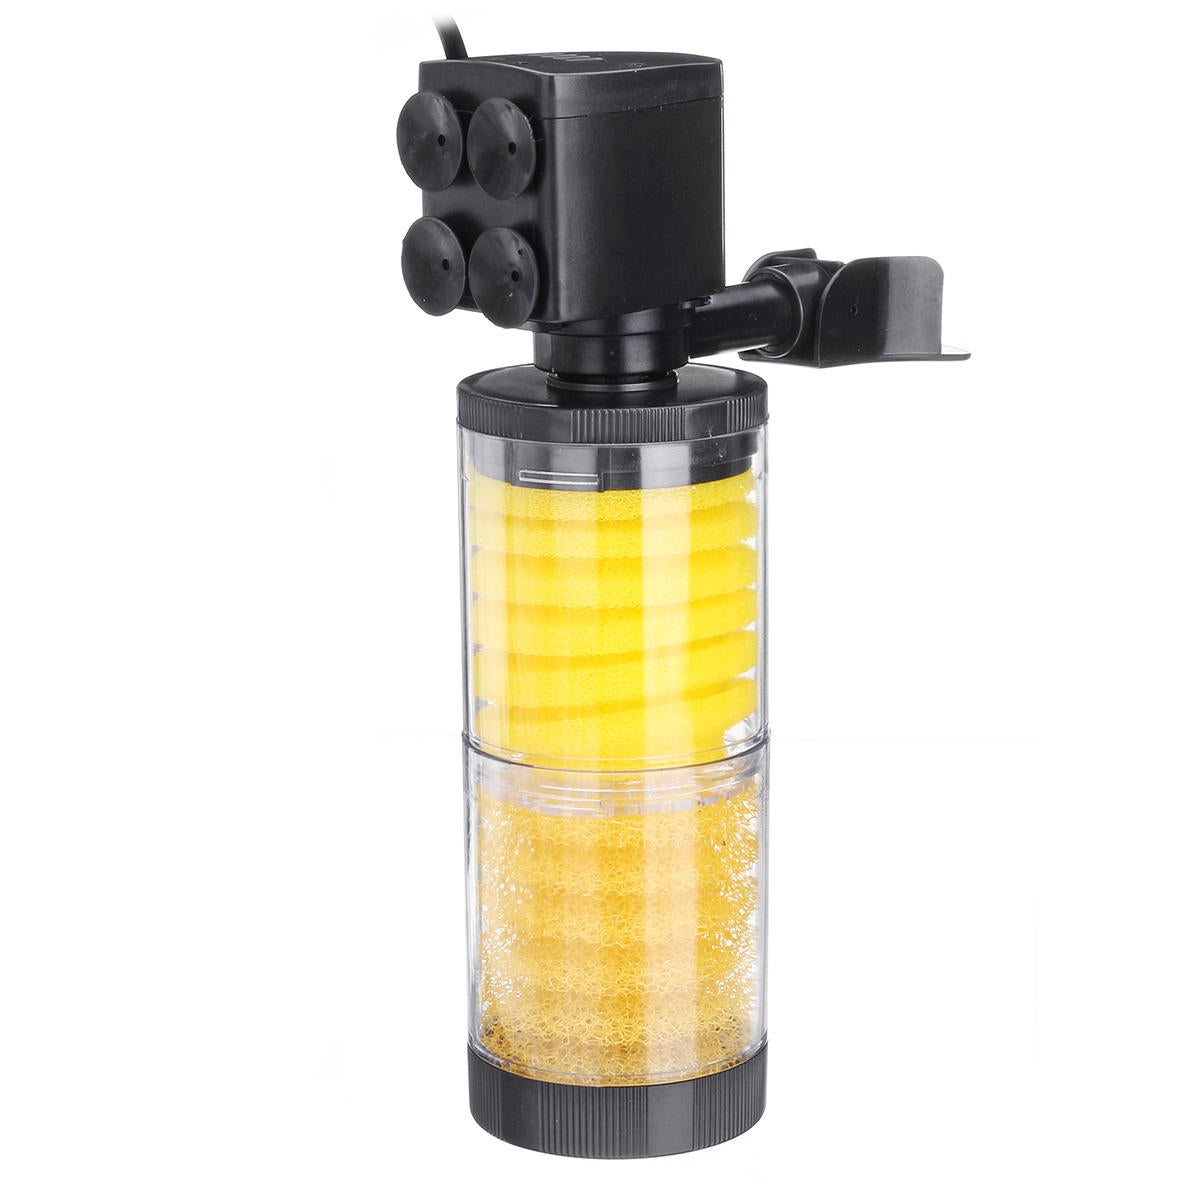 20 3 In 1 Aquarium Internal Filter Fish Tank Water Circulation Oxygen Filter Pump With Four Suction Cups